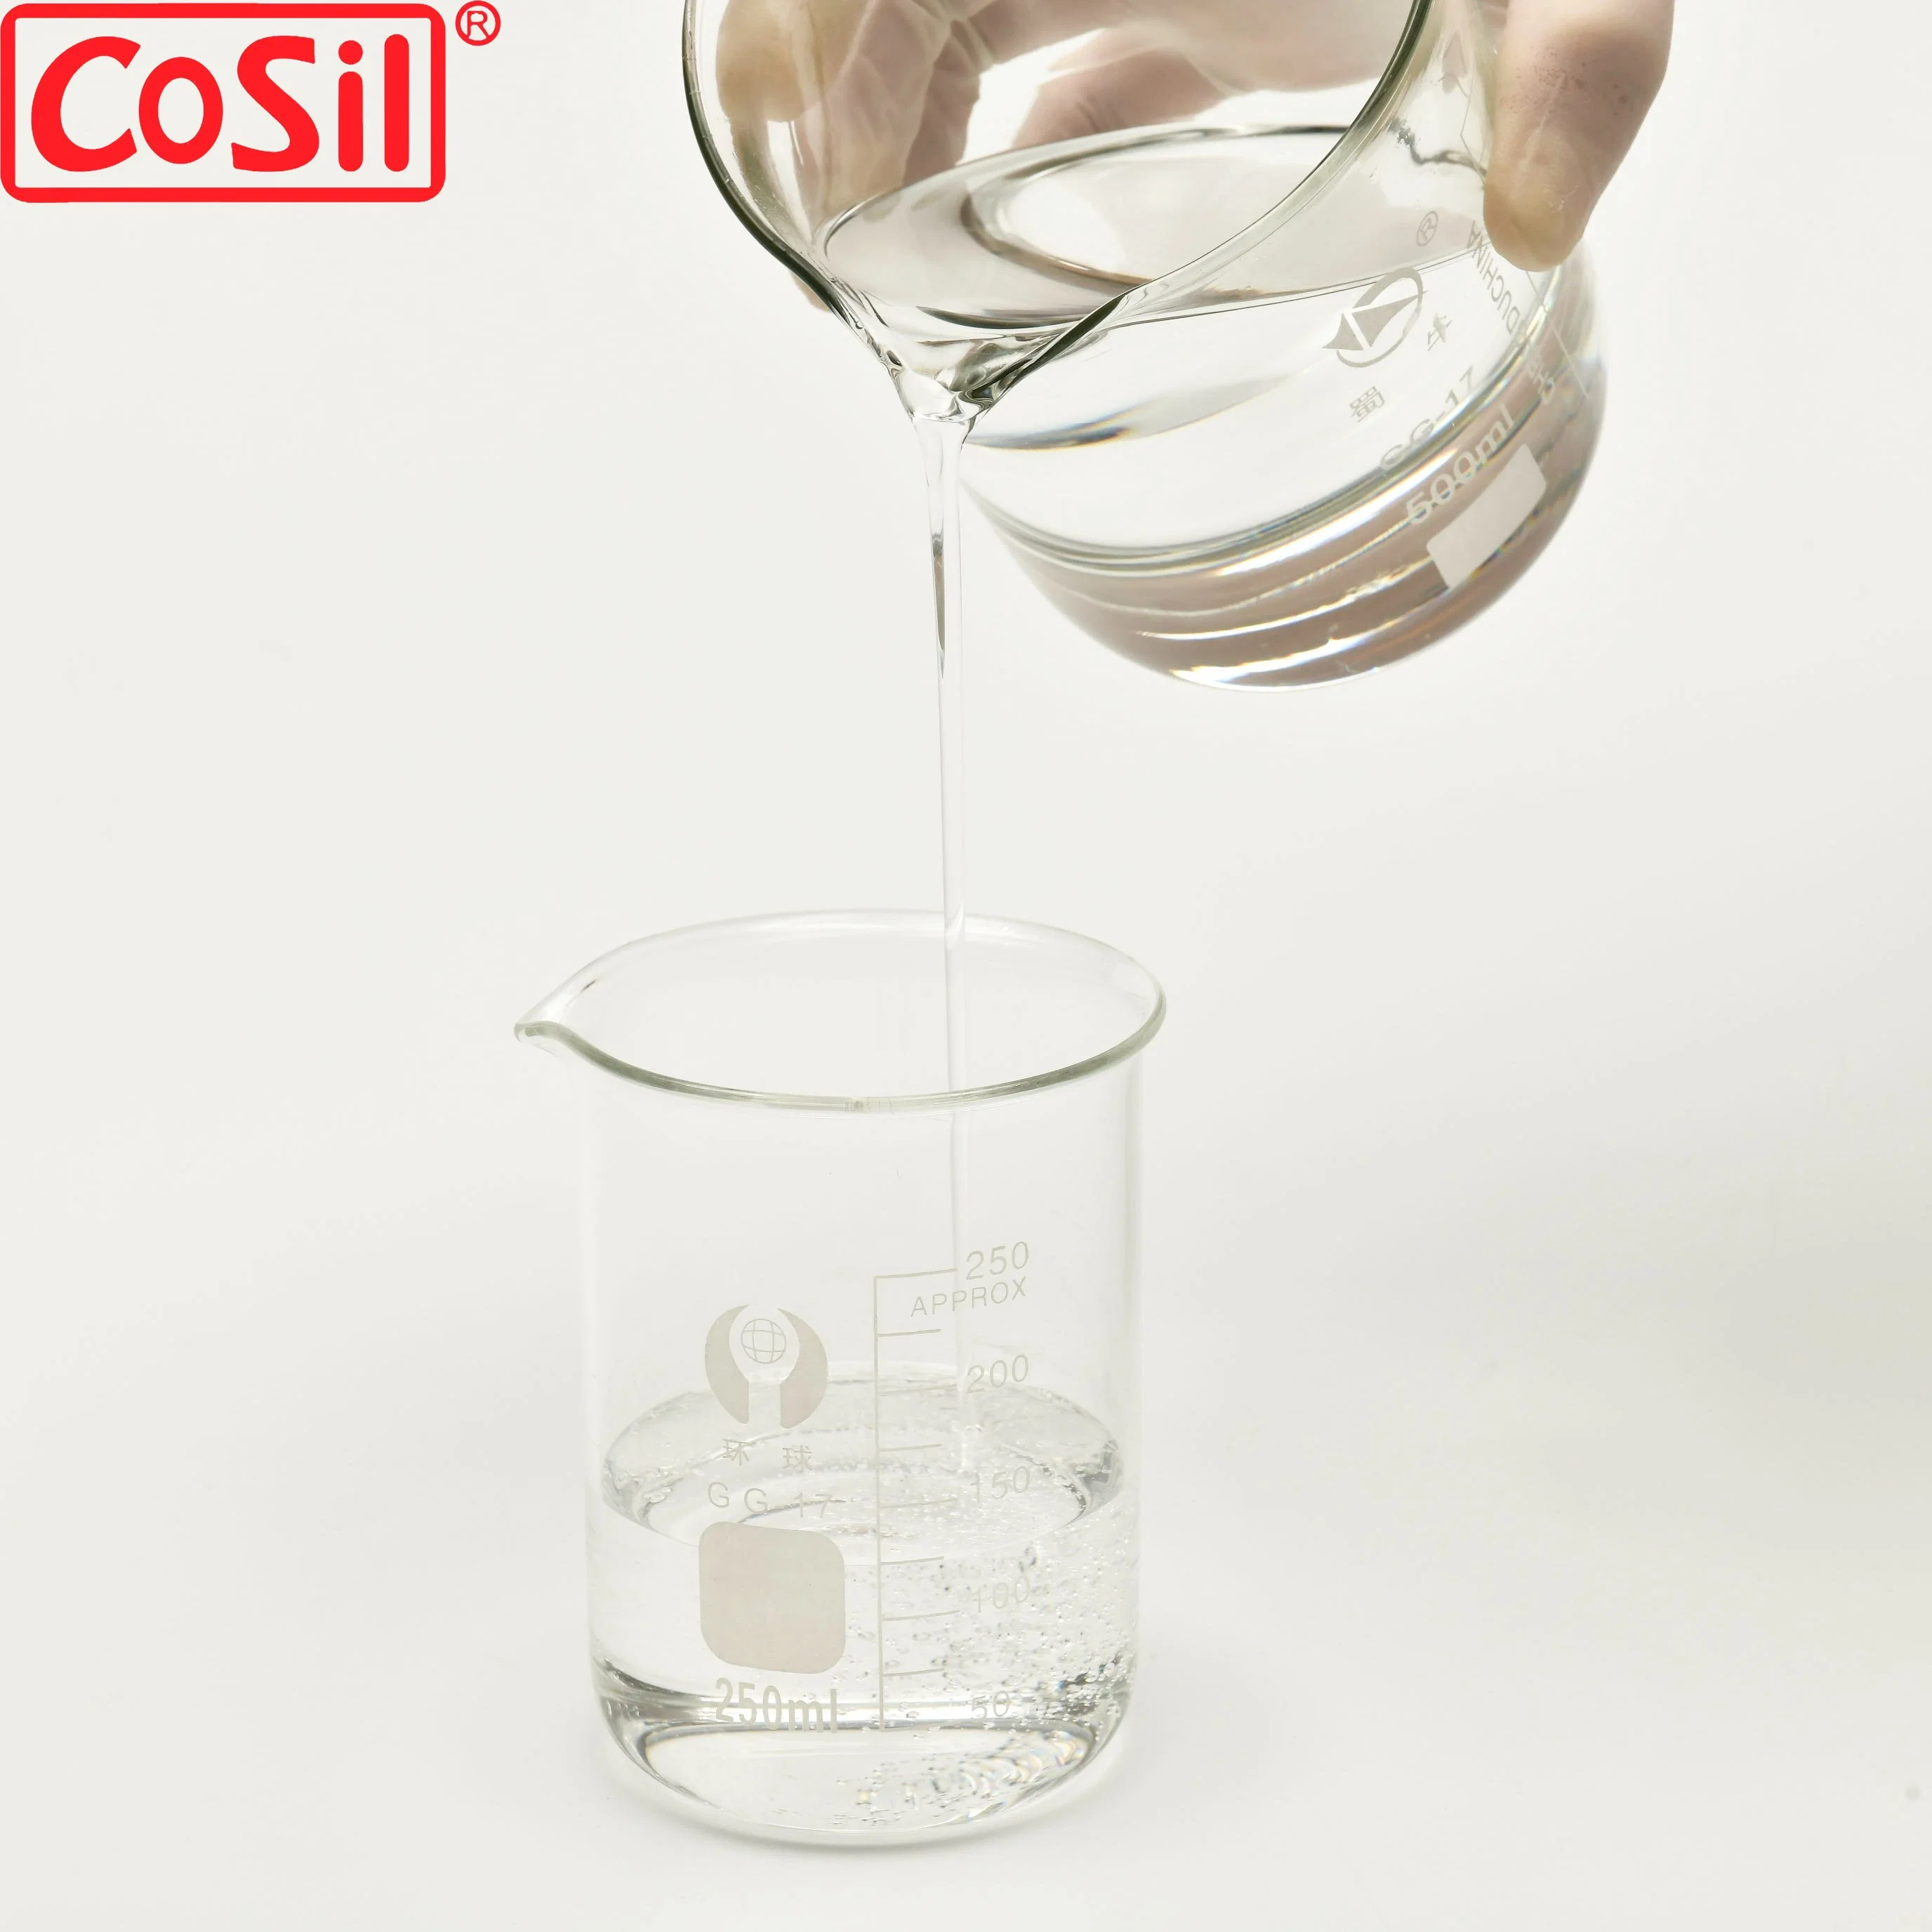 Cosil Hydroxy Silicone Oil, Colorless Oh Polymer, CAS 70131-67-8